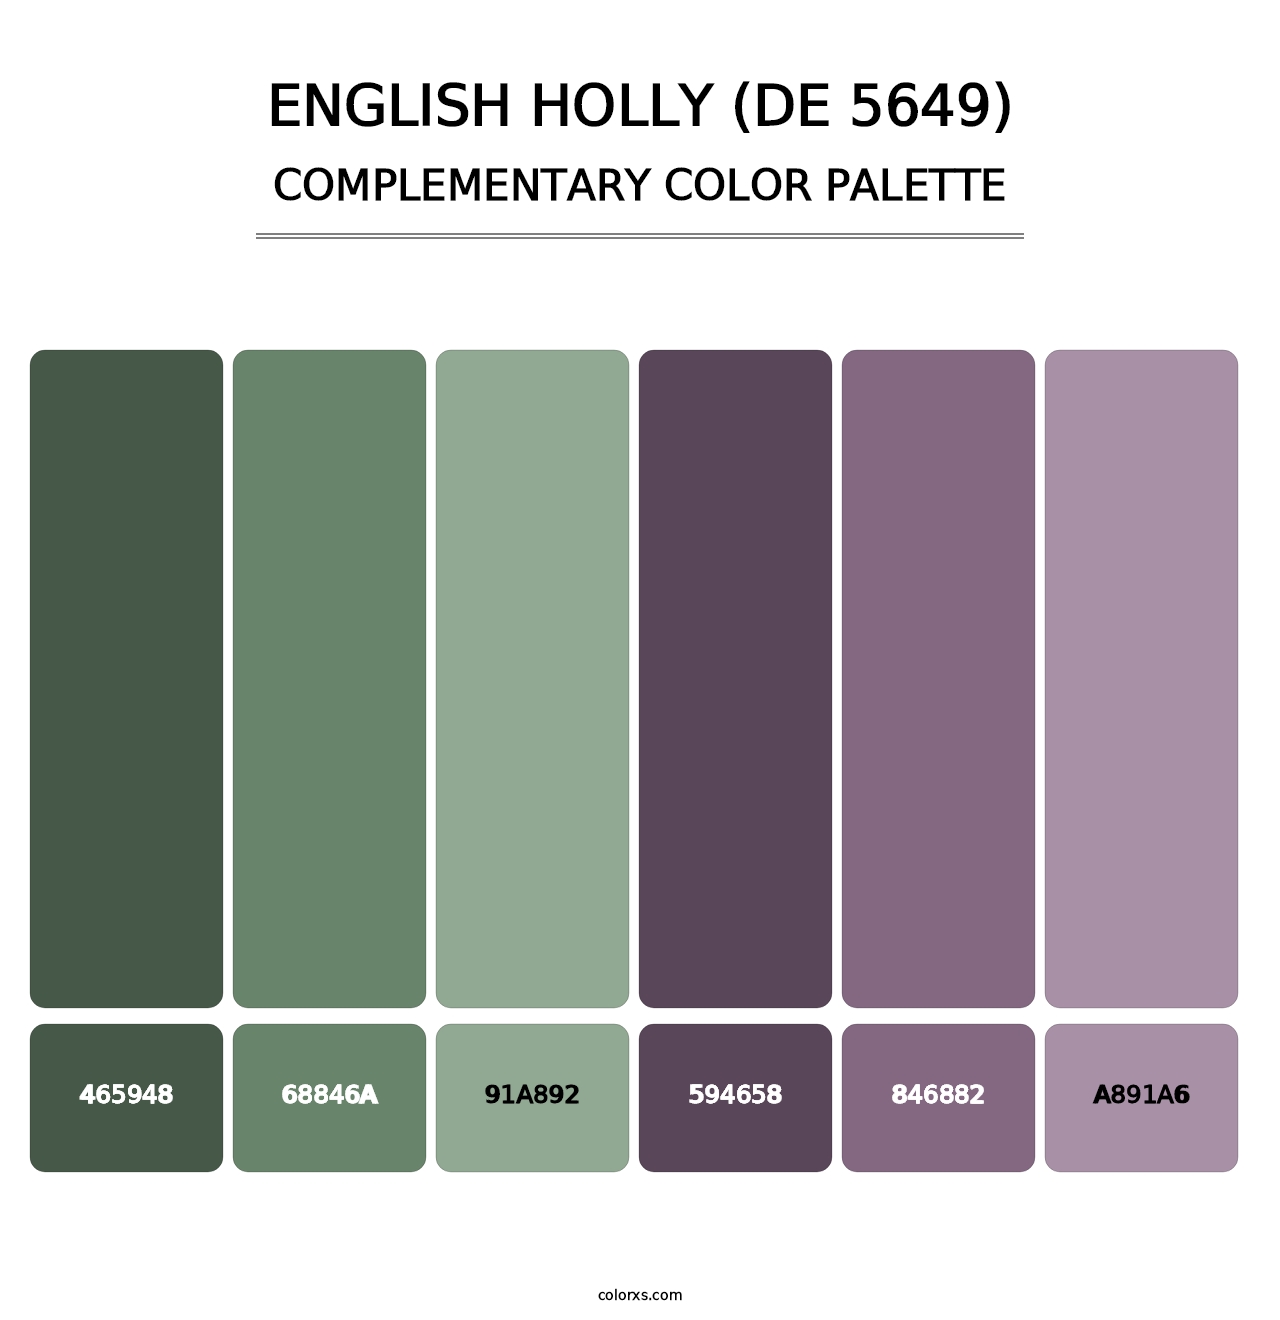 English Holly (DE 5649) - Complementary Color Palette